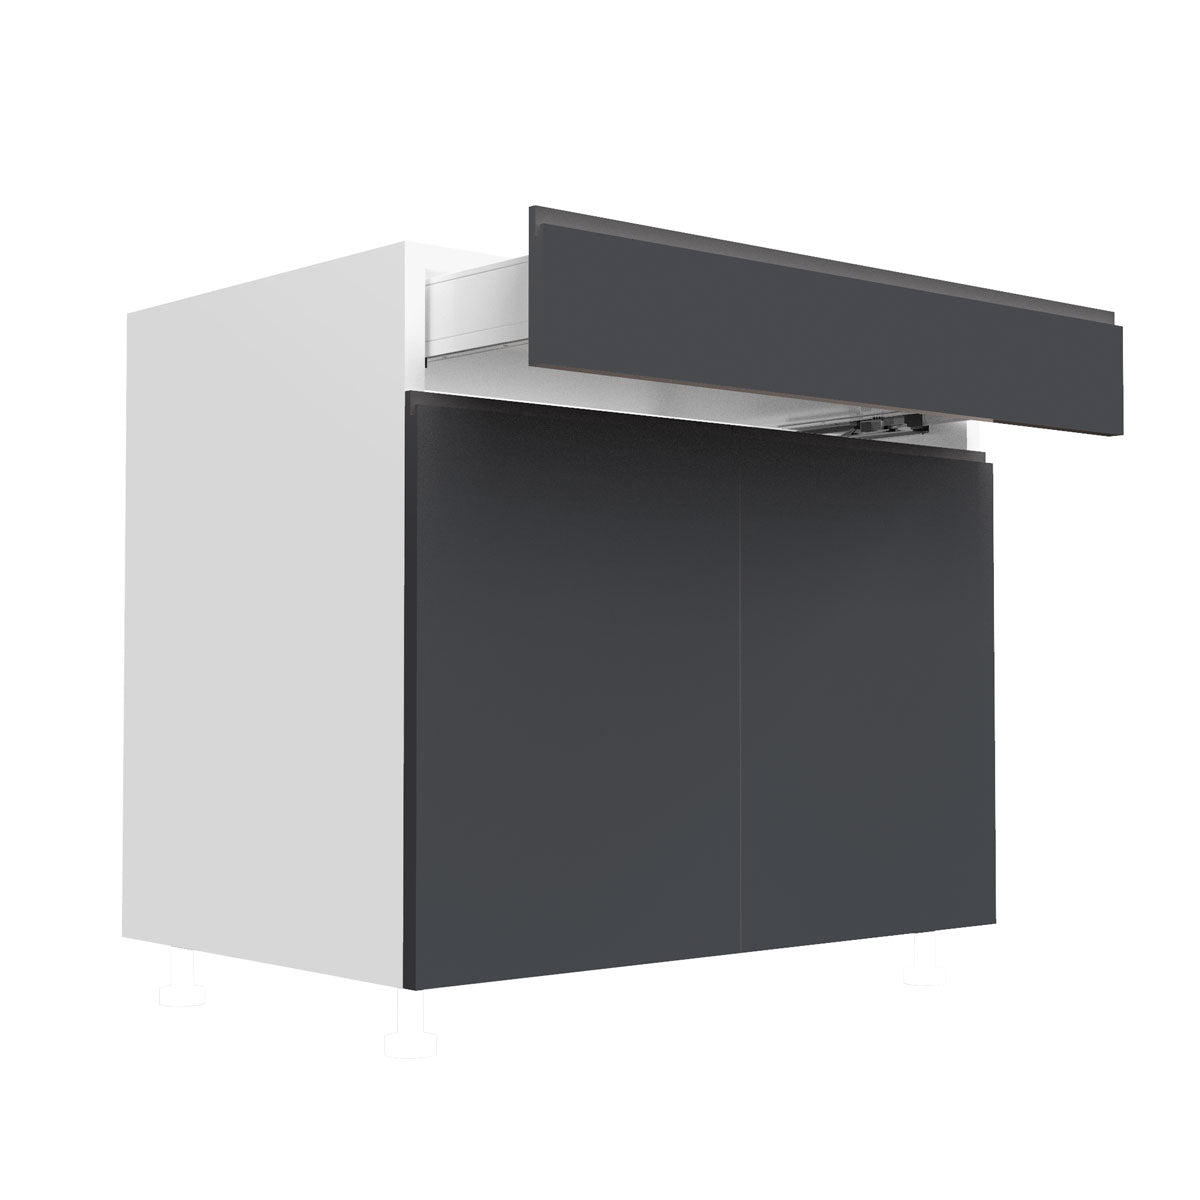 RTA - Lacquer Grey - Double Door Base Cabinets | 36"W x 30"H x 23.8"D